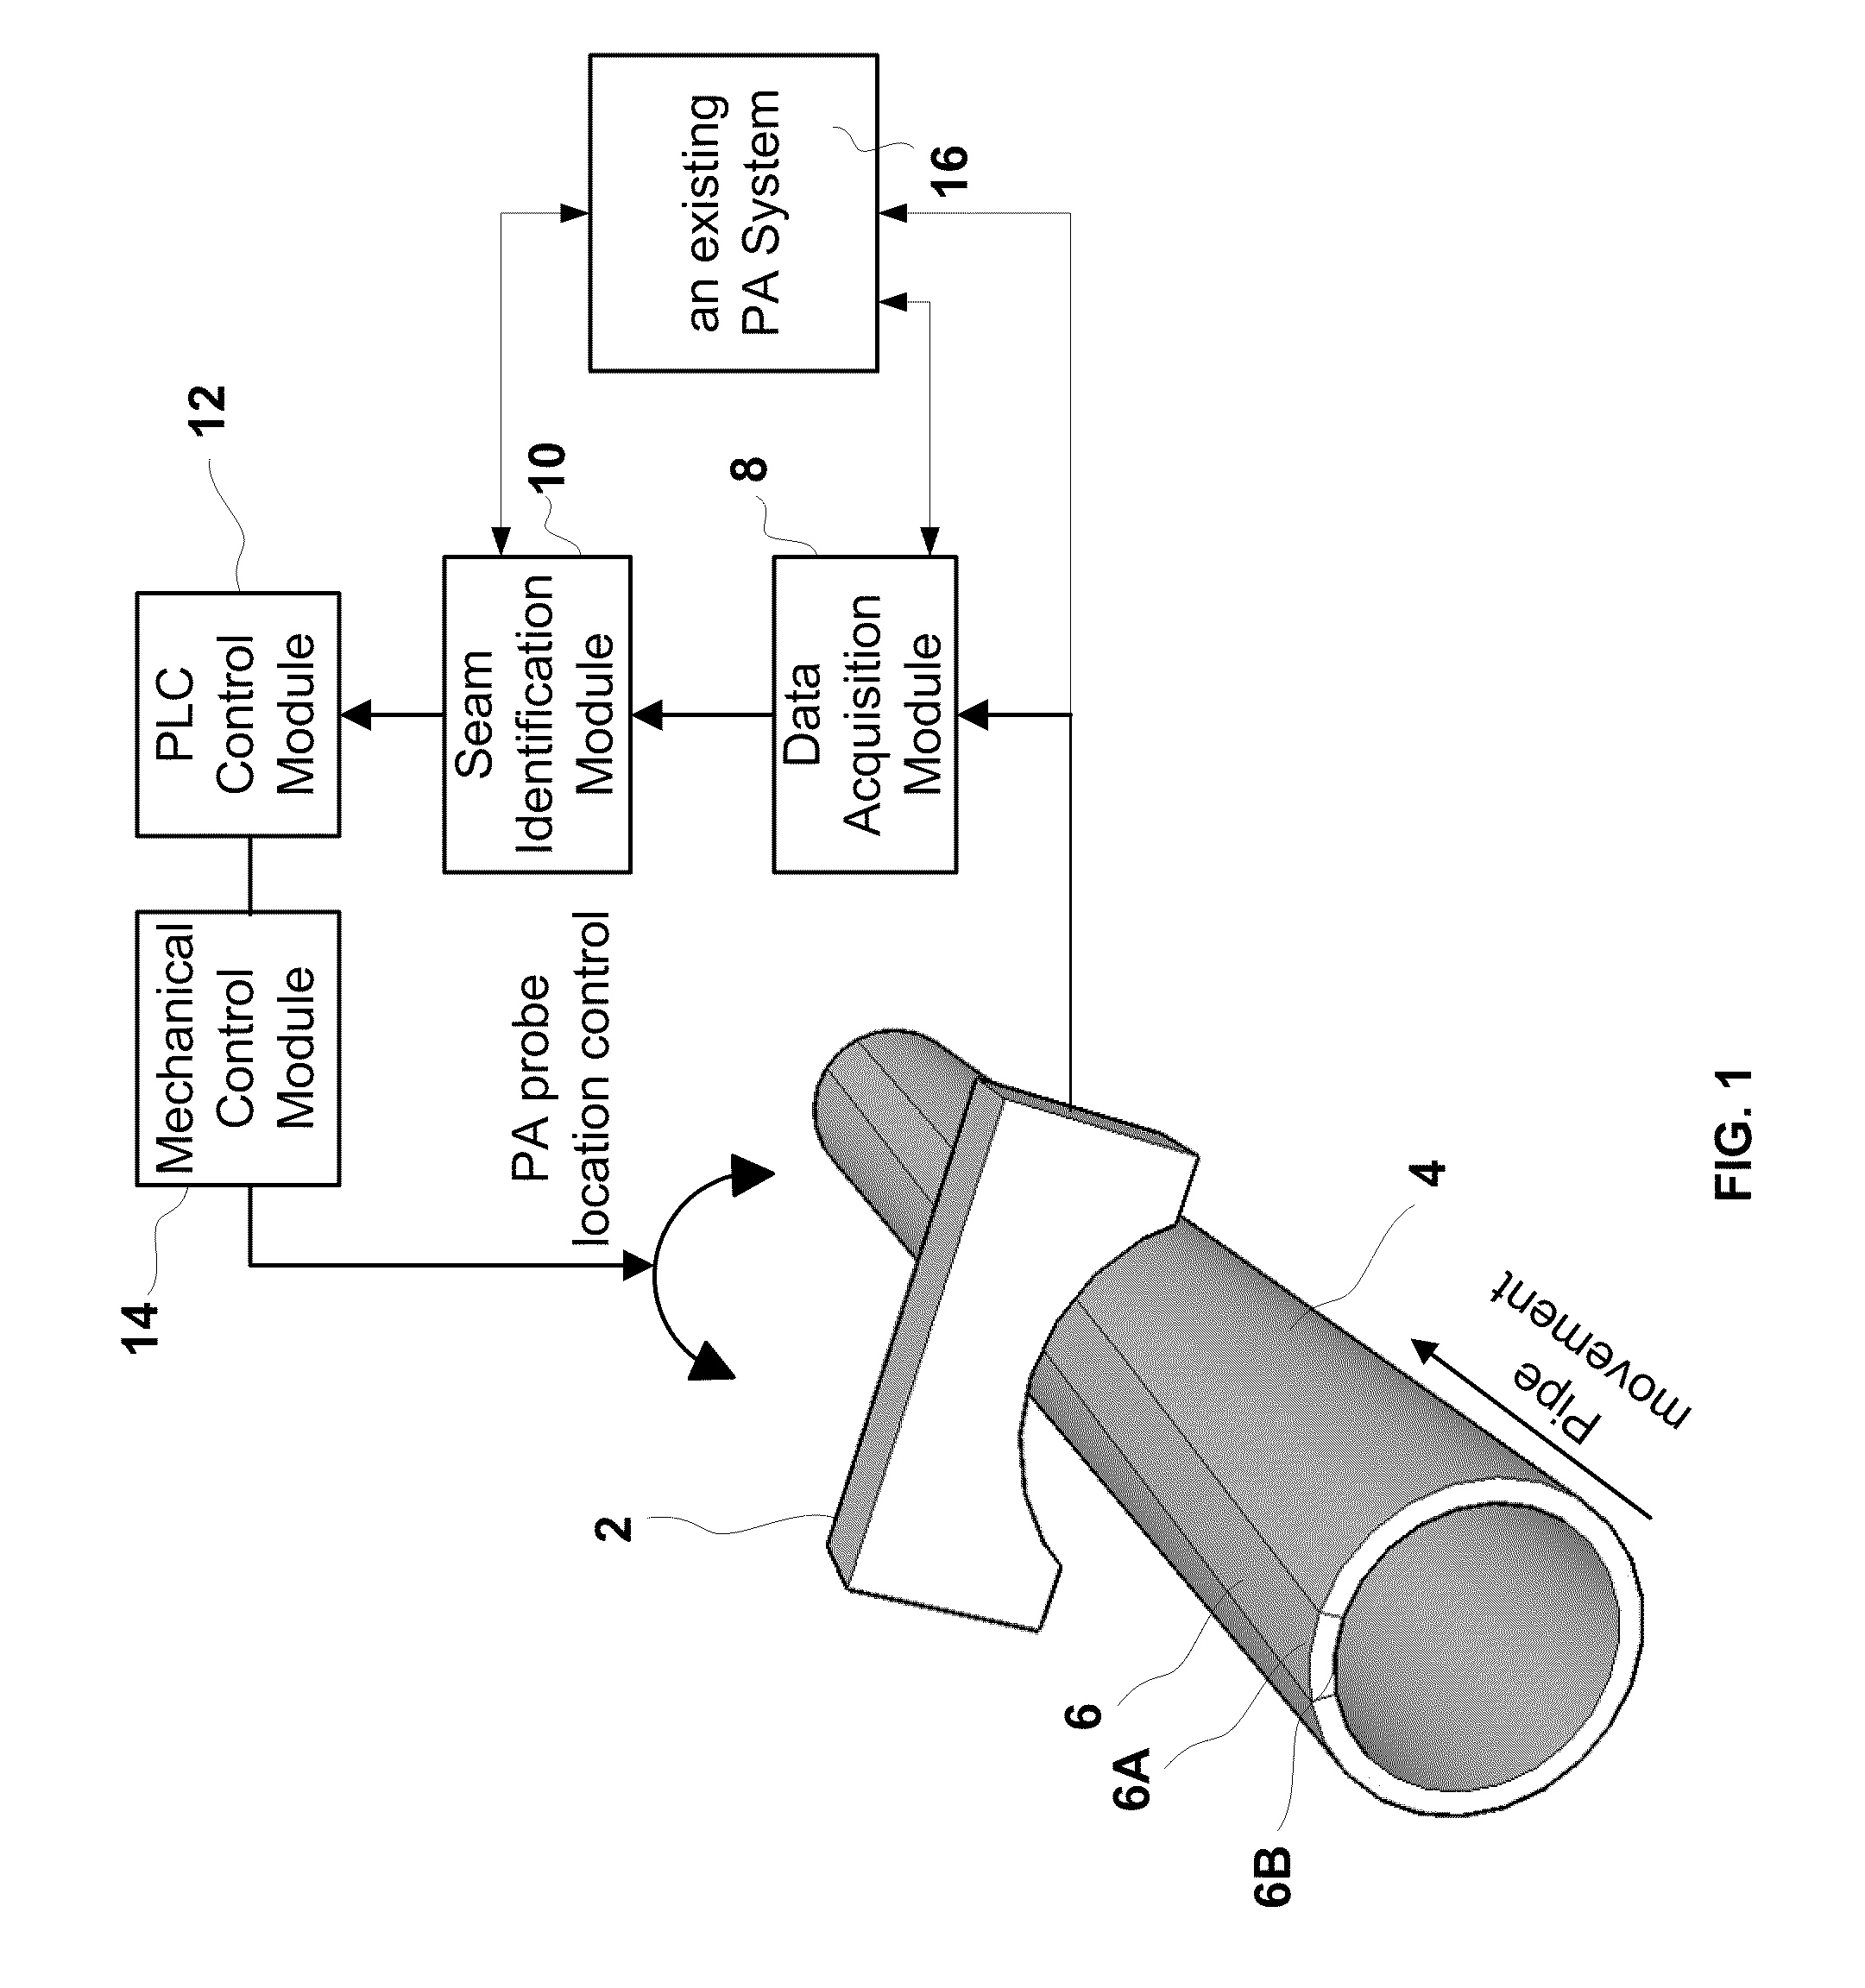 Weld seam tracking system using phased array ultrasonic devices